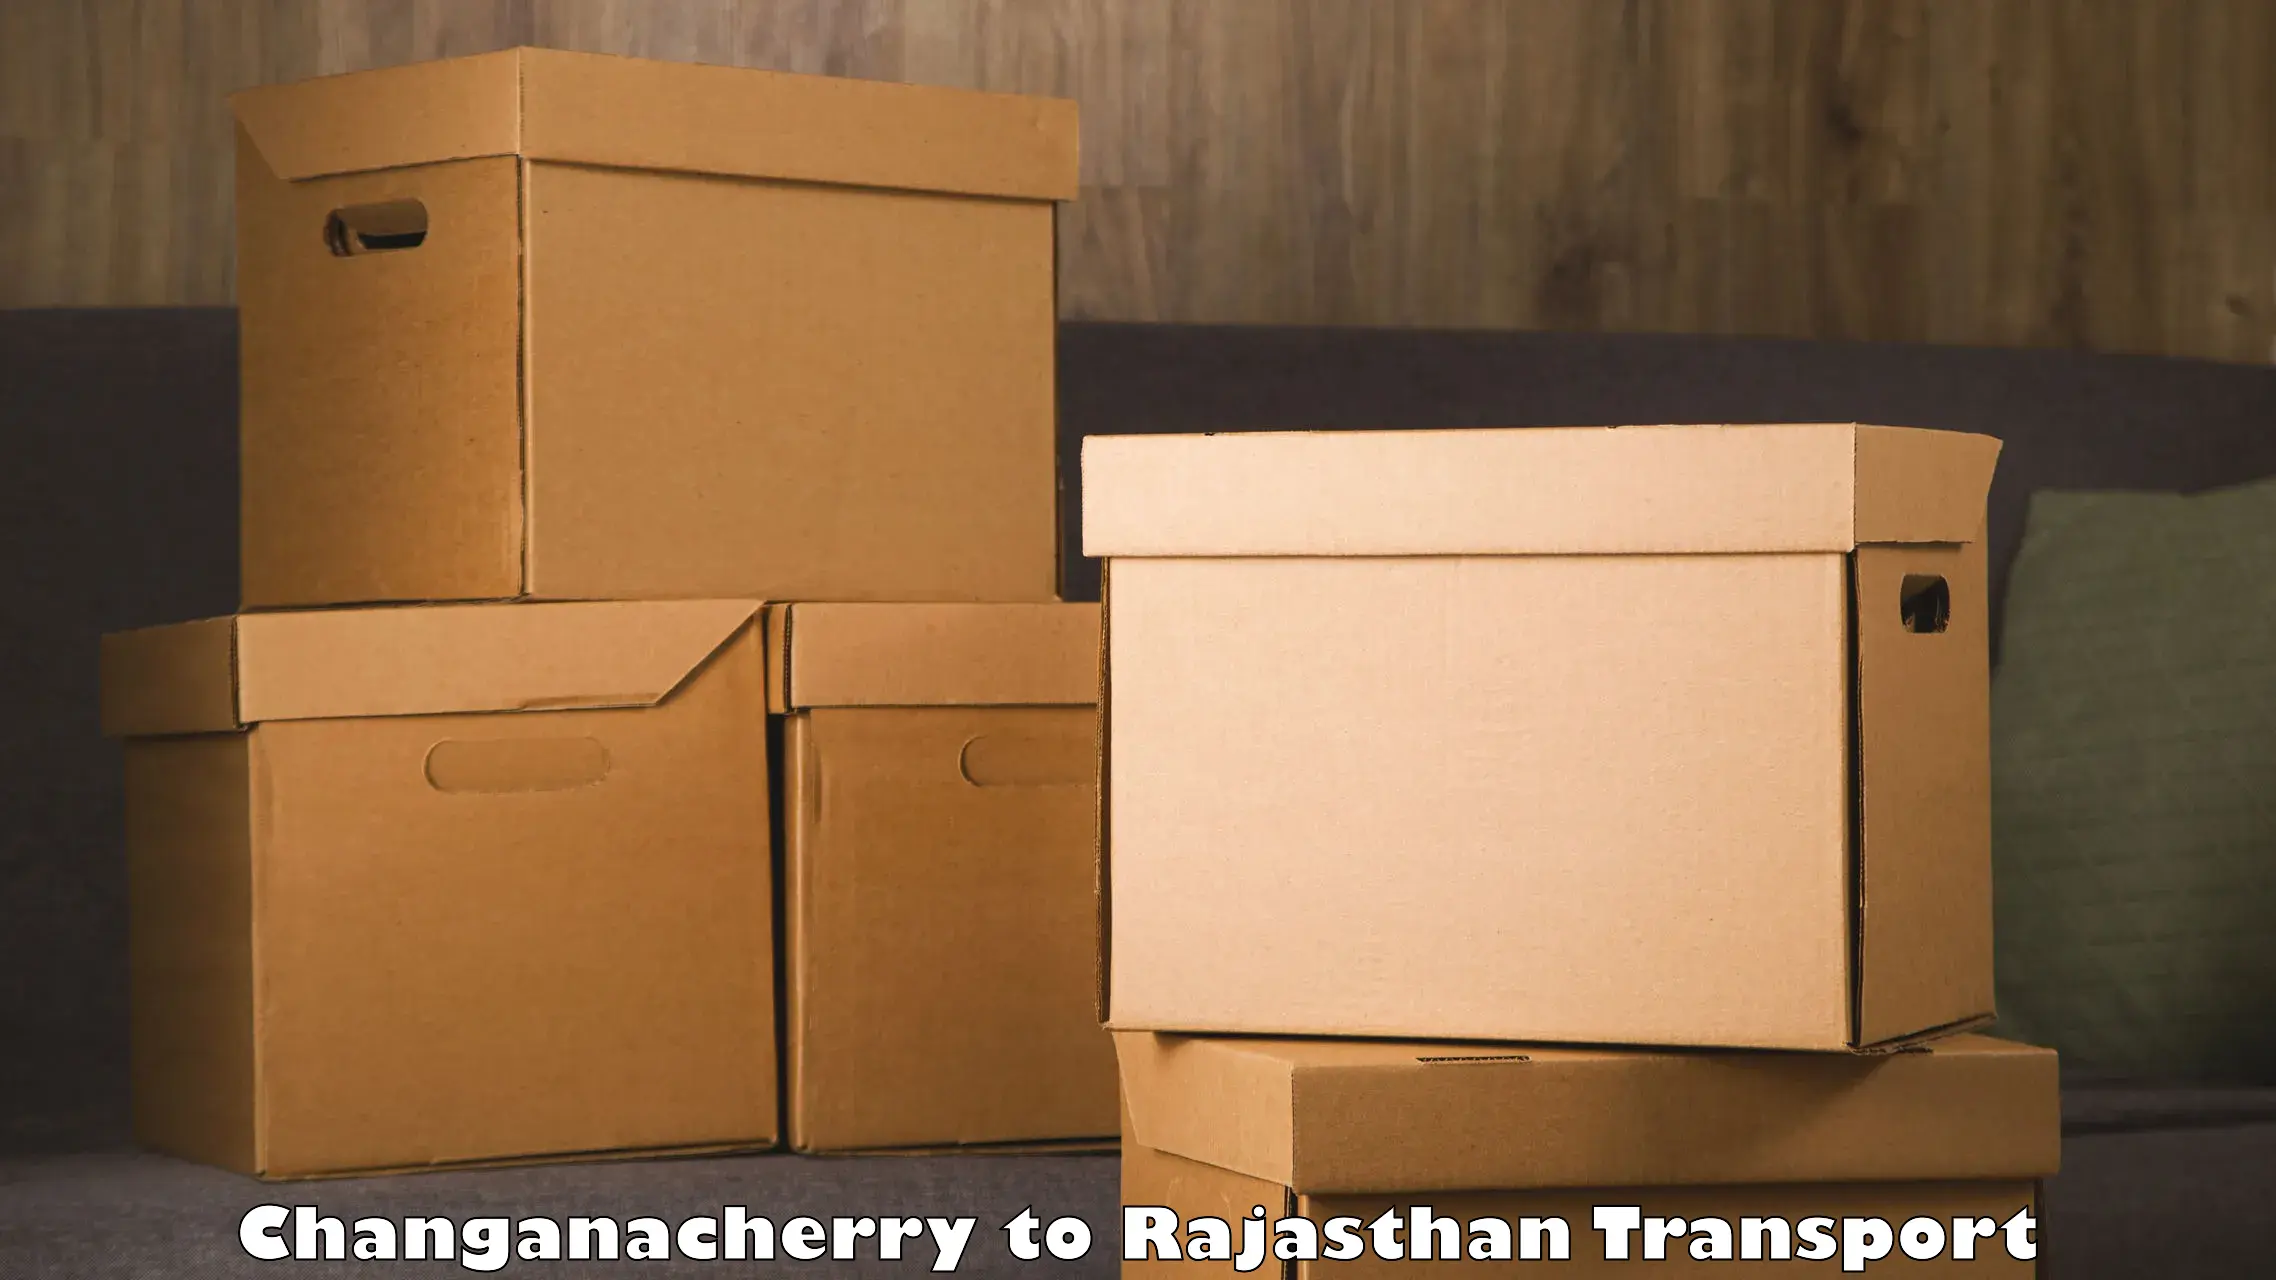 Package delivery services in Changanacherry to Rajgarh Rajasthan